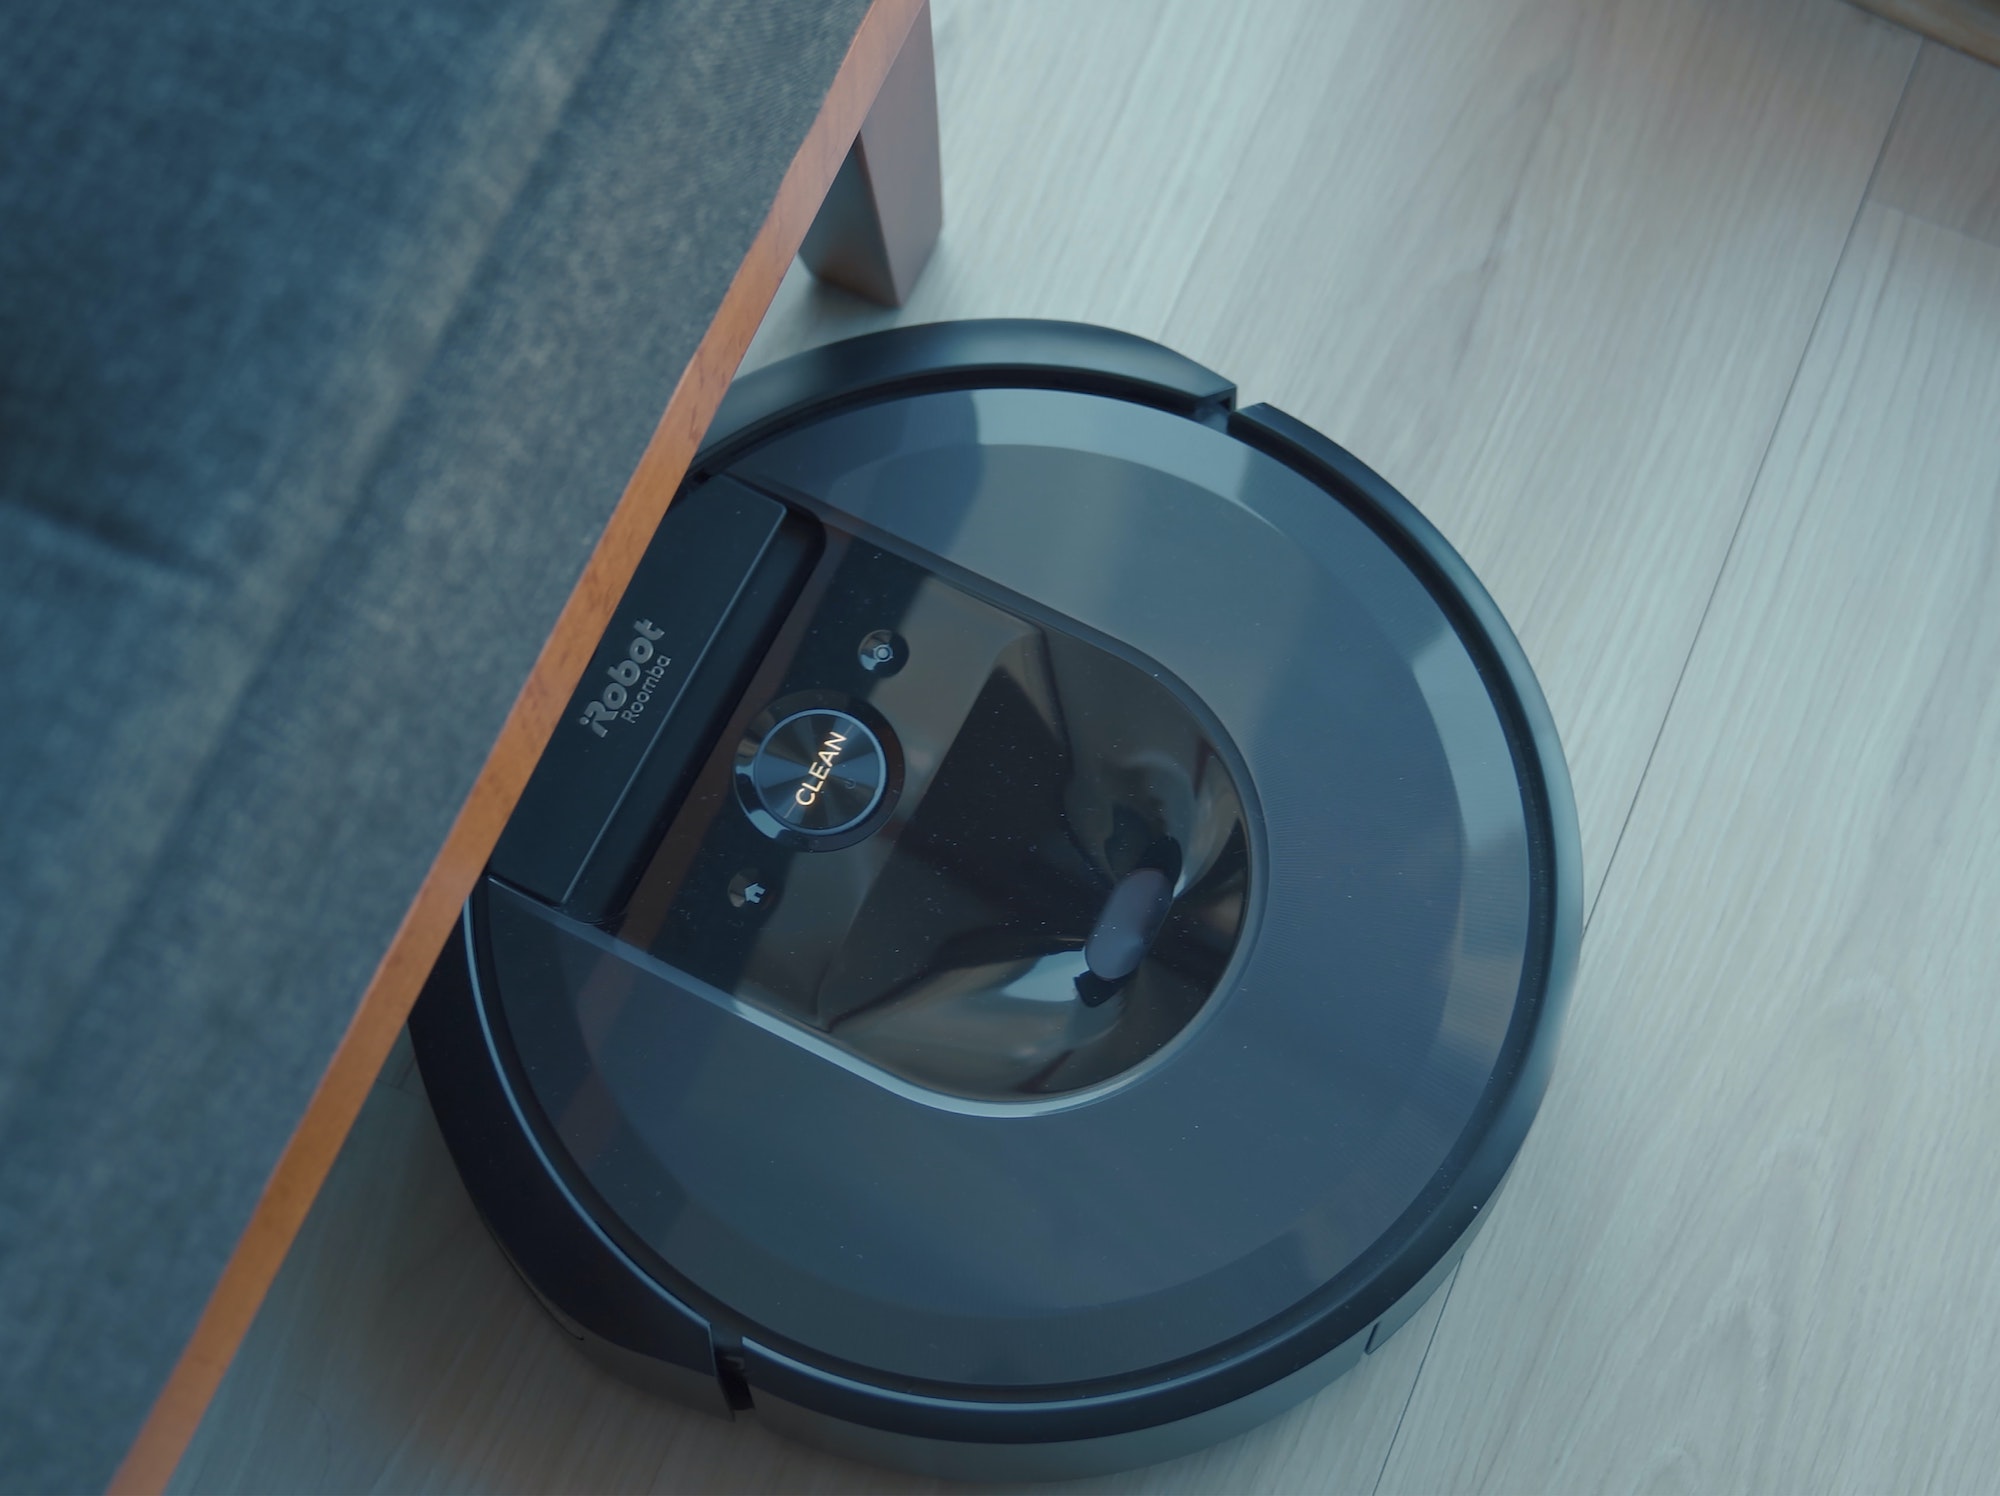 The FTC takes a second look at Amazon-iRobot deal